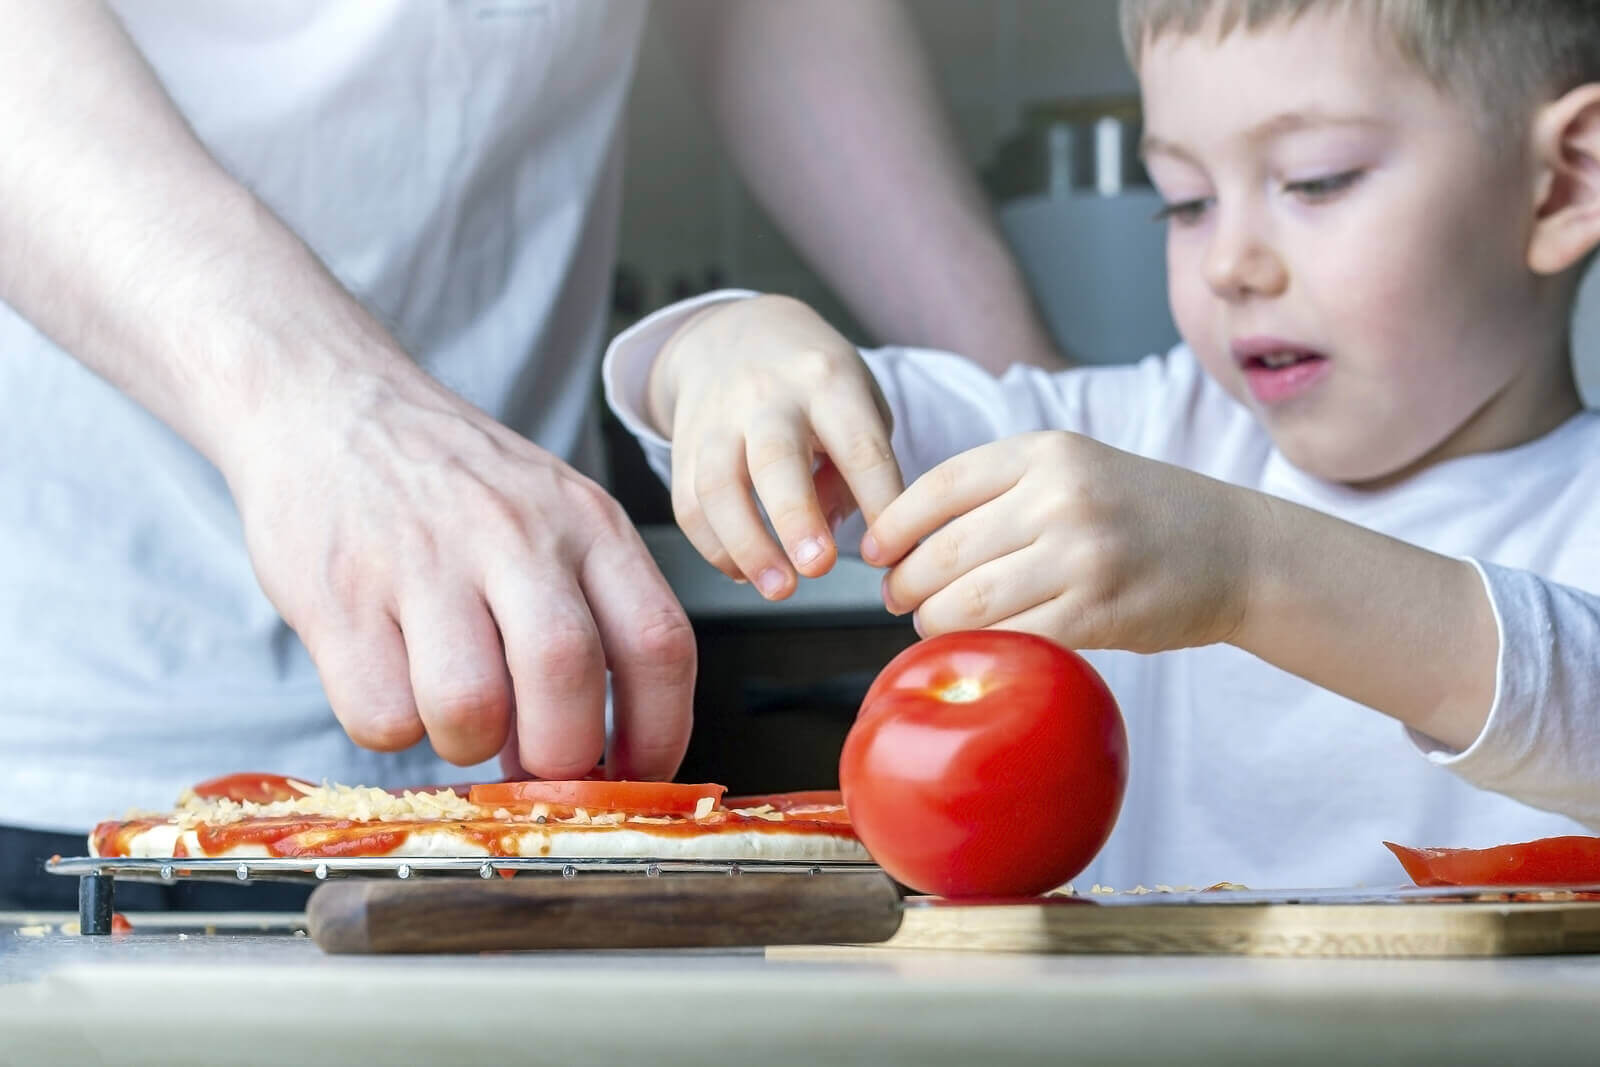 Cooking Activities for Children Ages 3 to 6